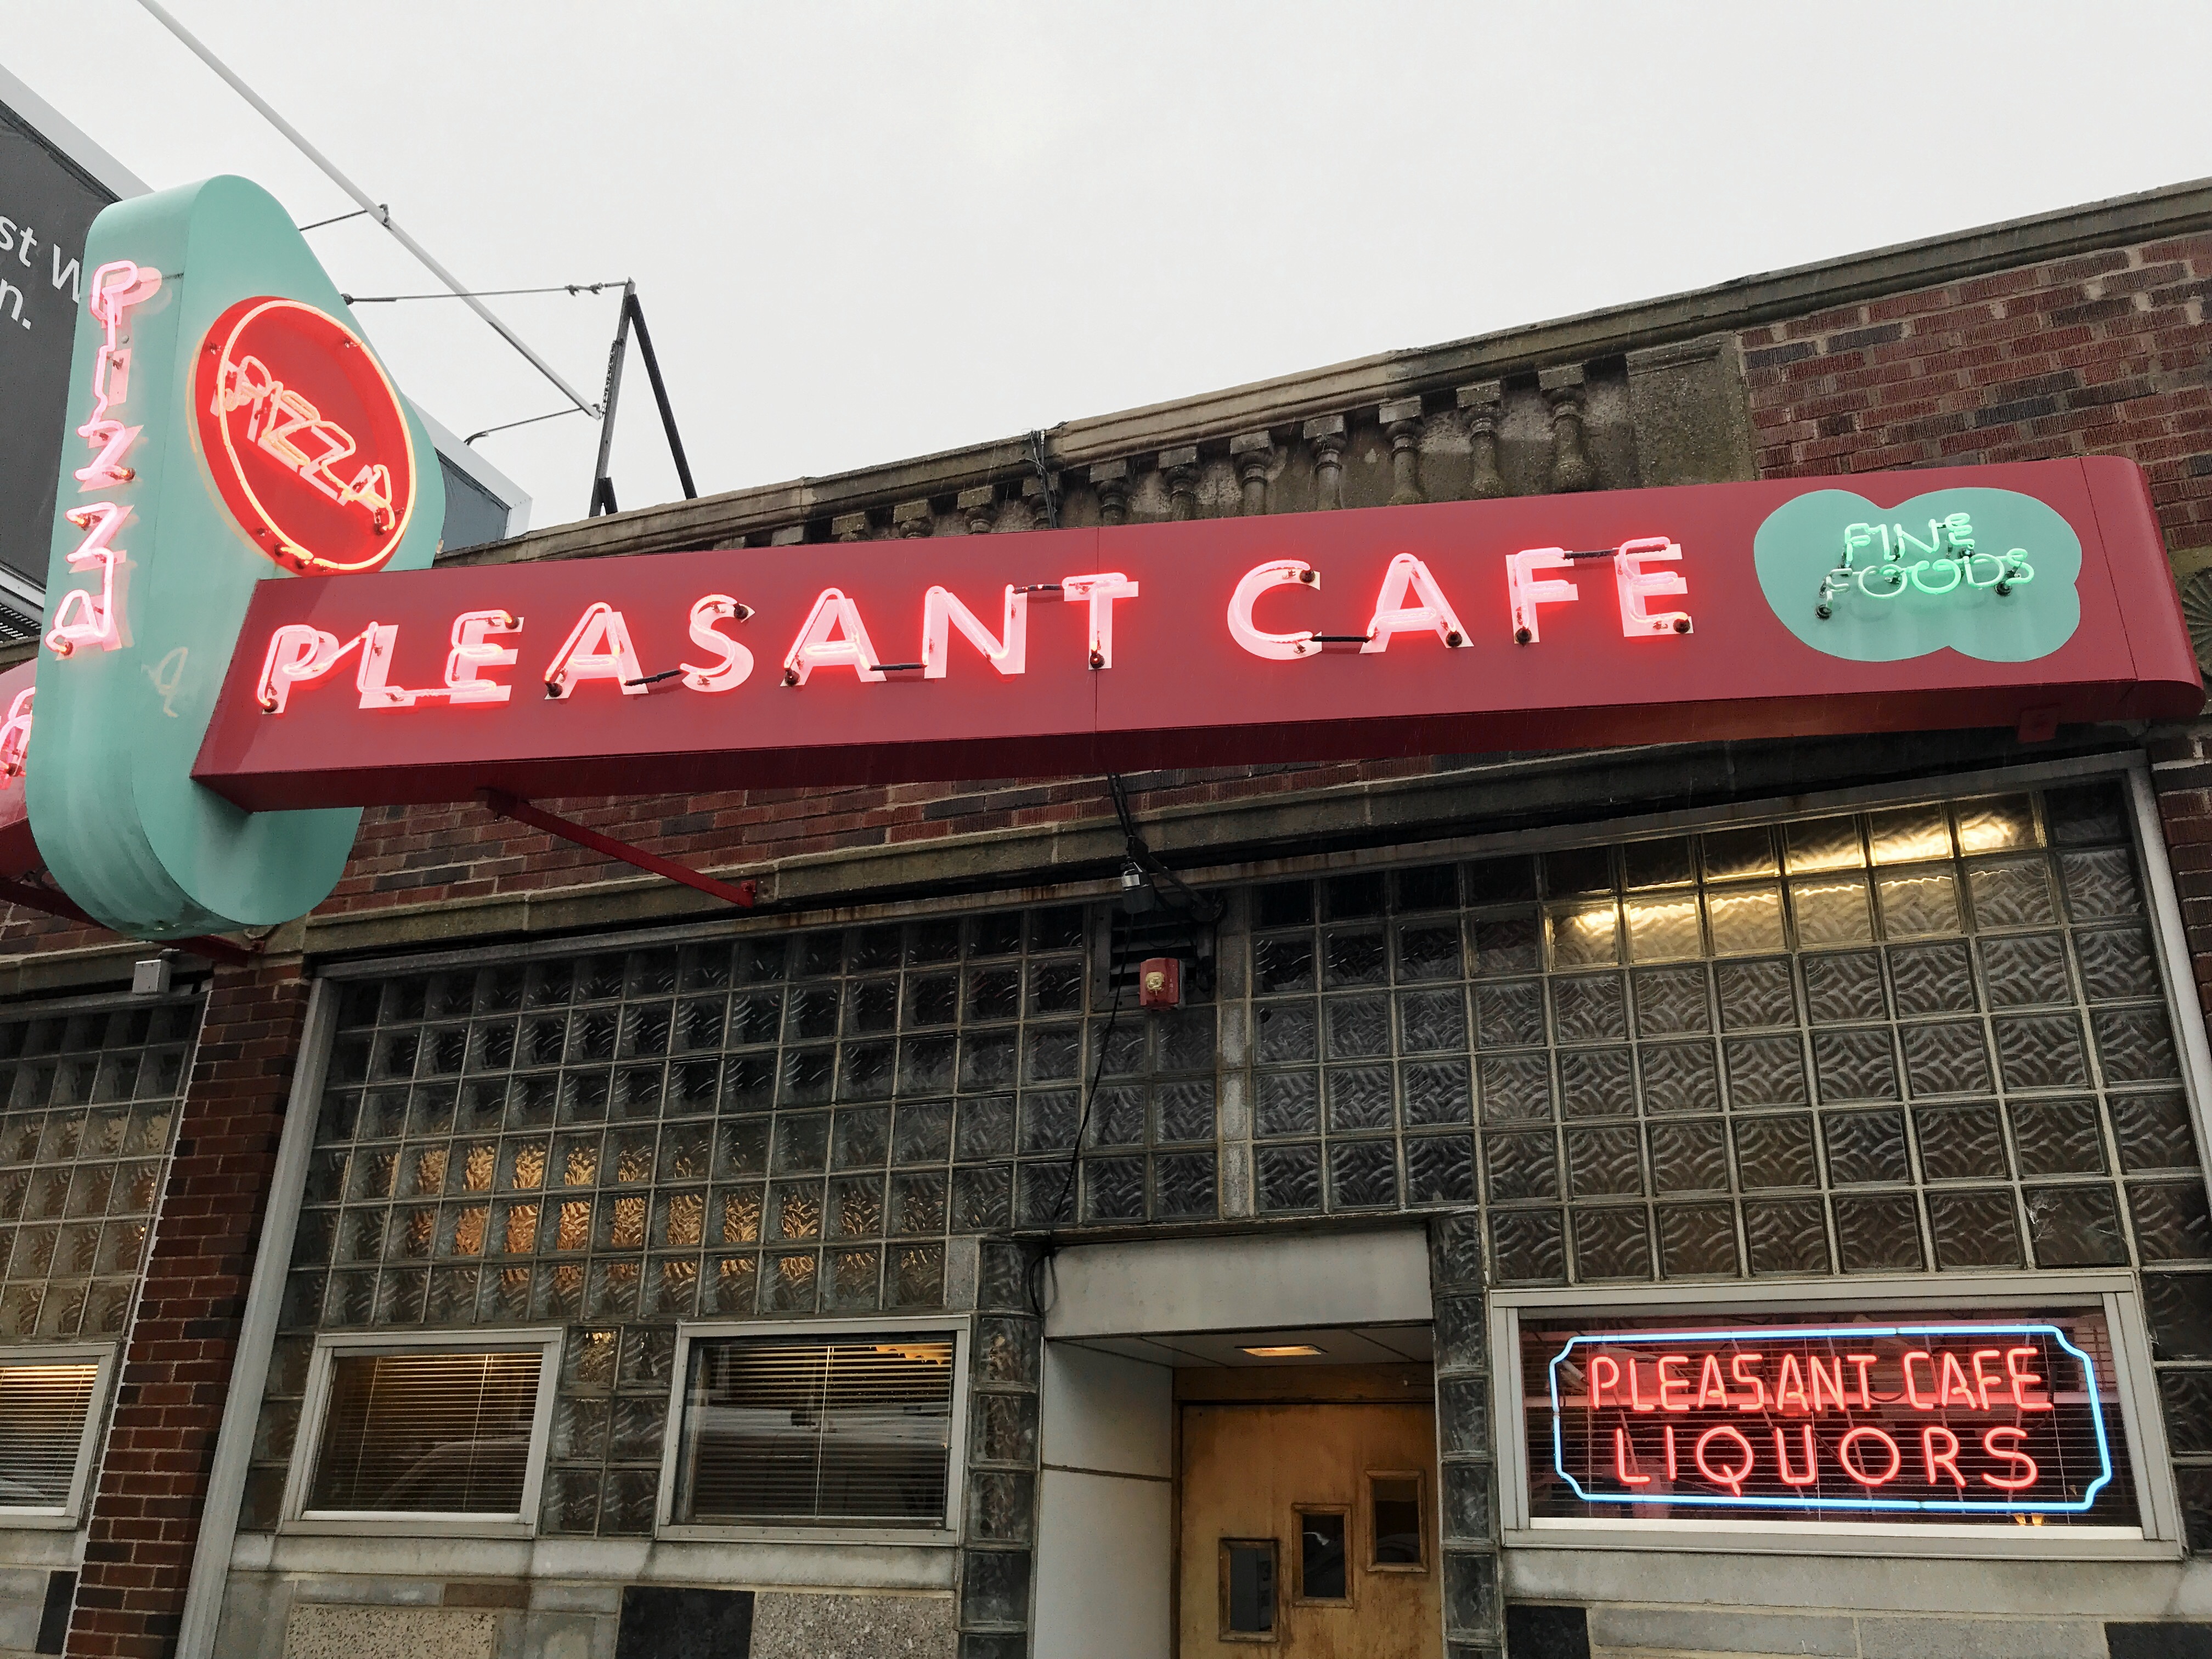 Exterior of an old-school restaurant with blue, pink, and red signage, including neon accents, that reads Pleasant Cafe.